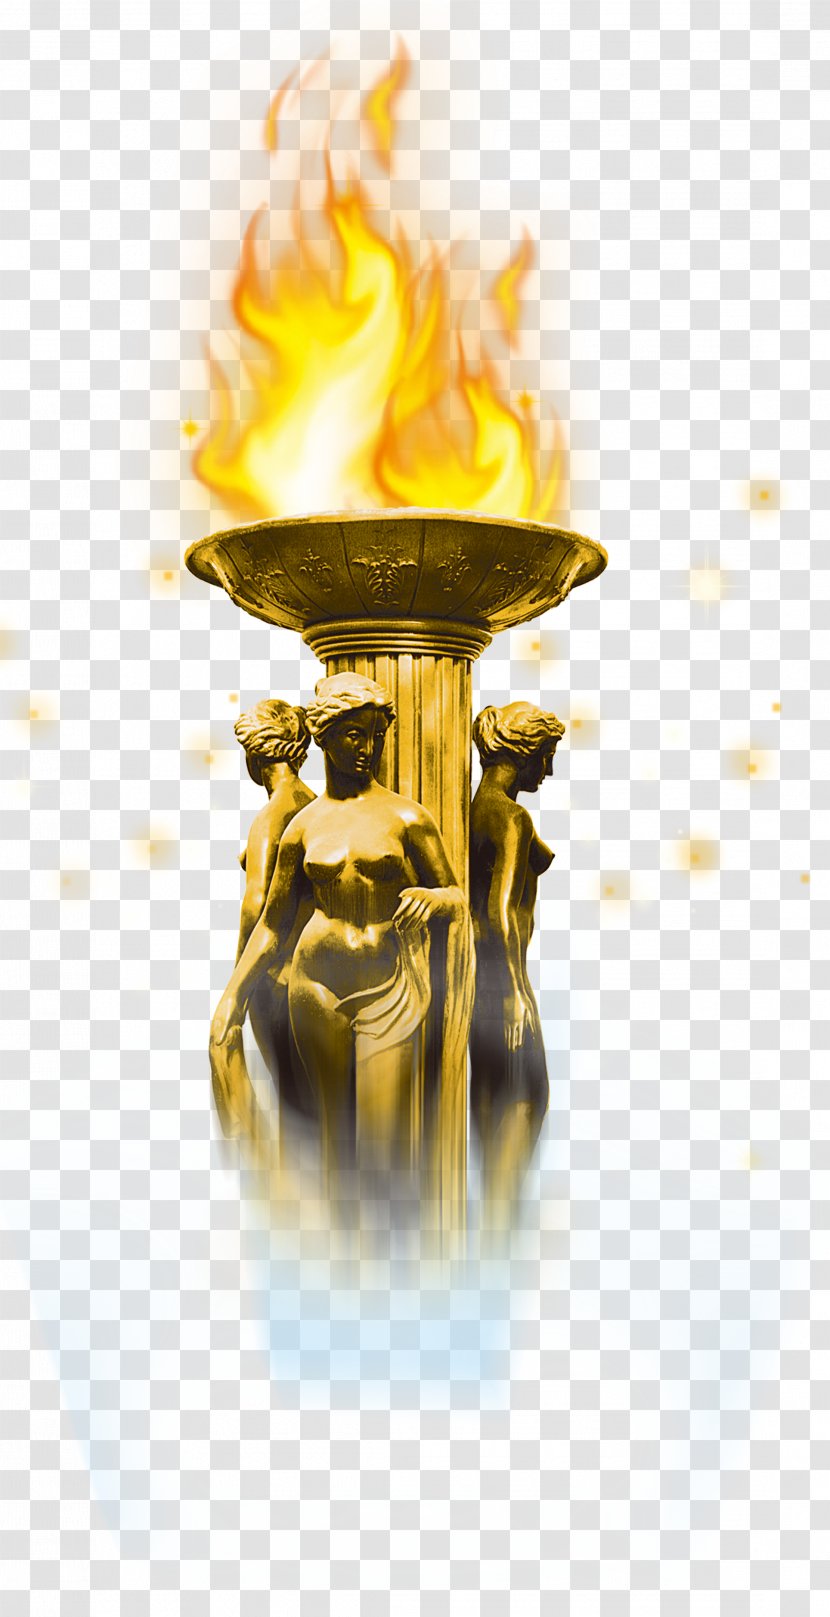 Fire Flame Carbon - Drawing - Fiery Torch Sculpture Transparent PNG